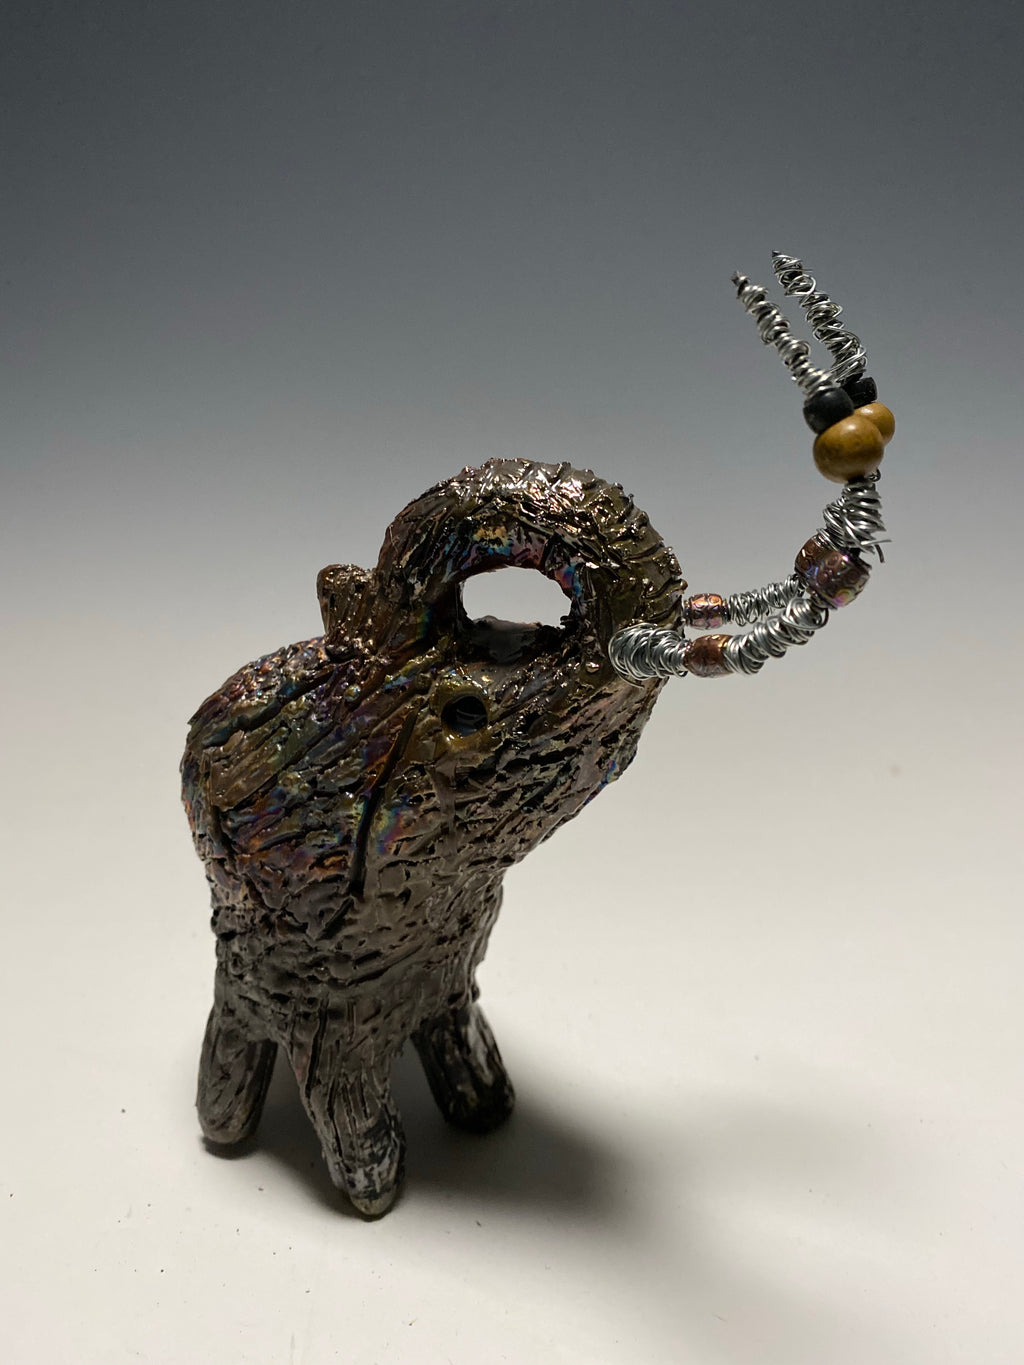 Raku Elephant Have you HERD!!!!!!  Just one of these lovely Raku Fired Elephant will make an excellent gift for your  friend, sorority or for your home’ special place centerpiece.  6" x 4" x 4" 1lbs Wood beaded with  silver tusk Beautiful metallic raku colors For decorative purposely only.